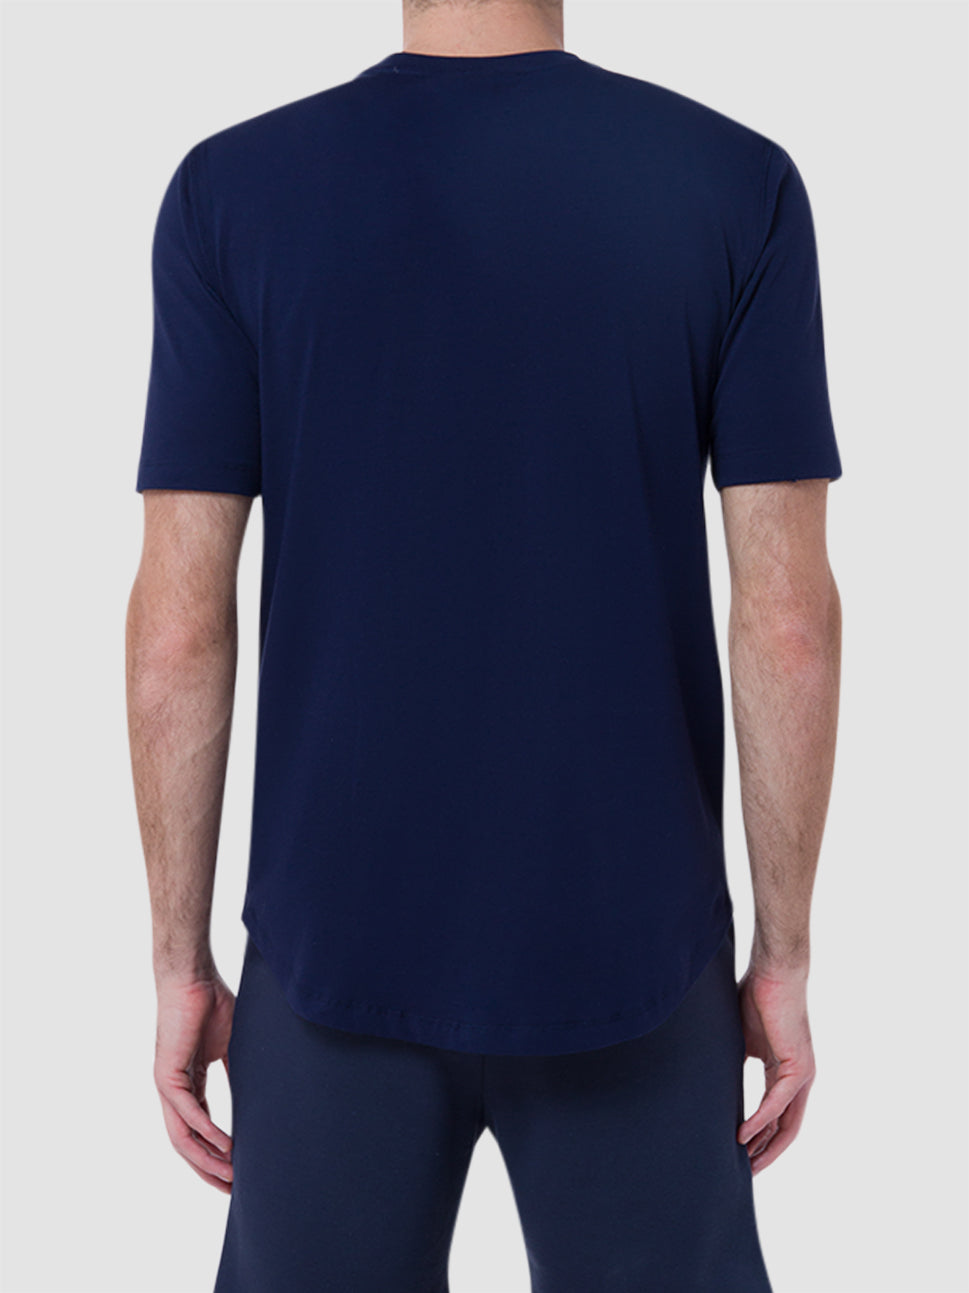 Balr Athletic Small Branded Chest T Shirt Navy Blue B1112.1050